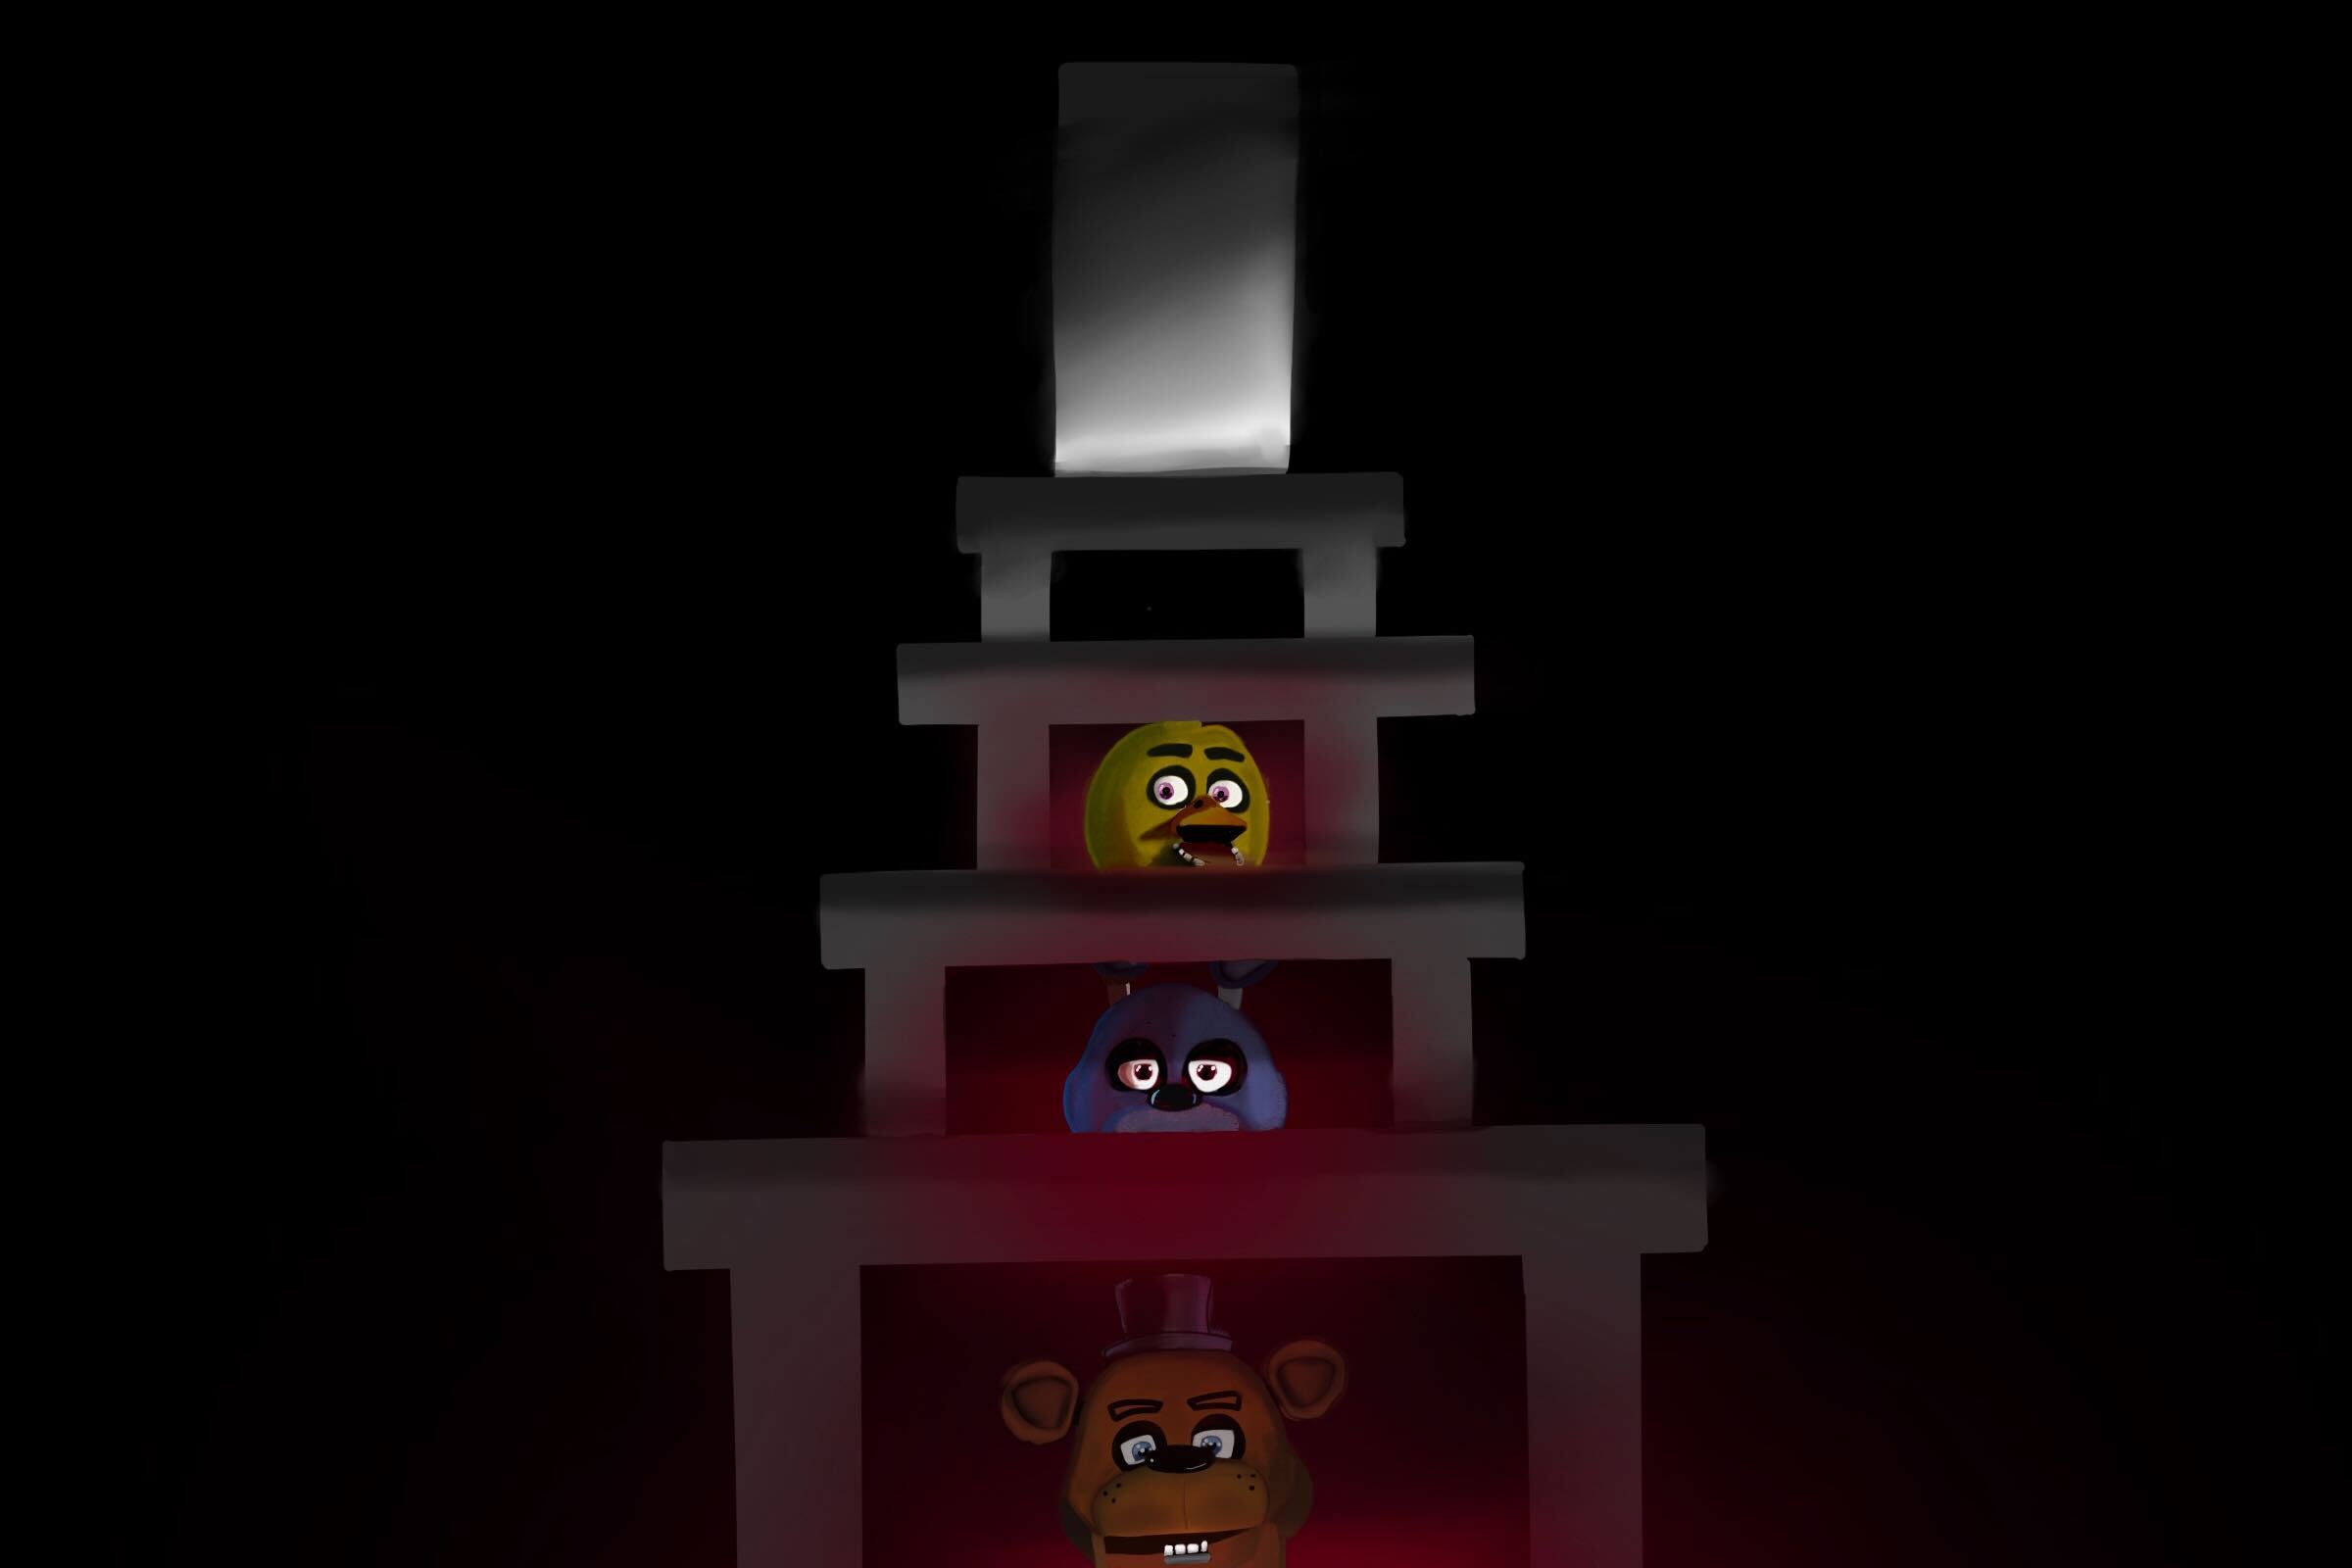 The Living Tombstone - FIVE NIGHTS AT FREDDY'S SONG! 1 HOUR